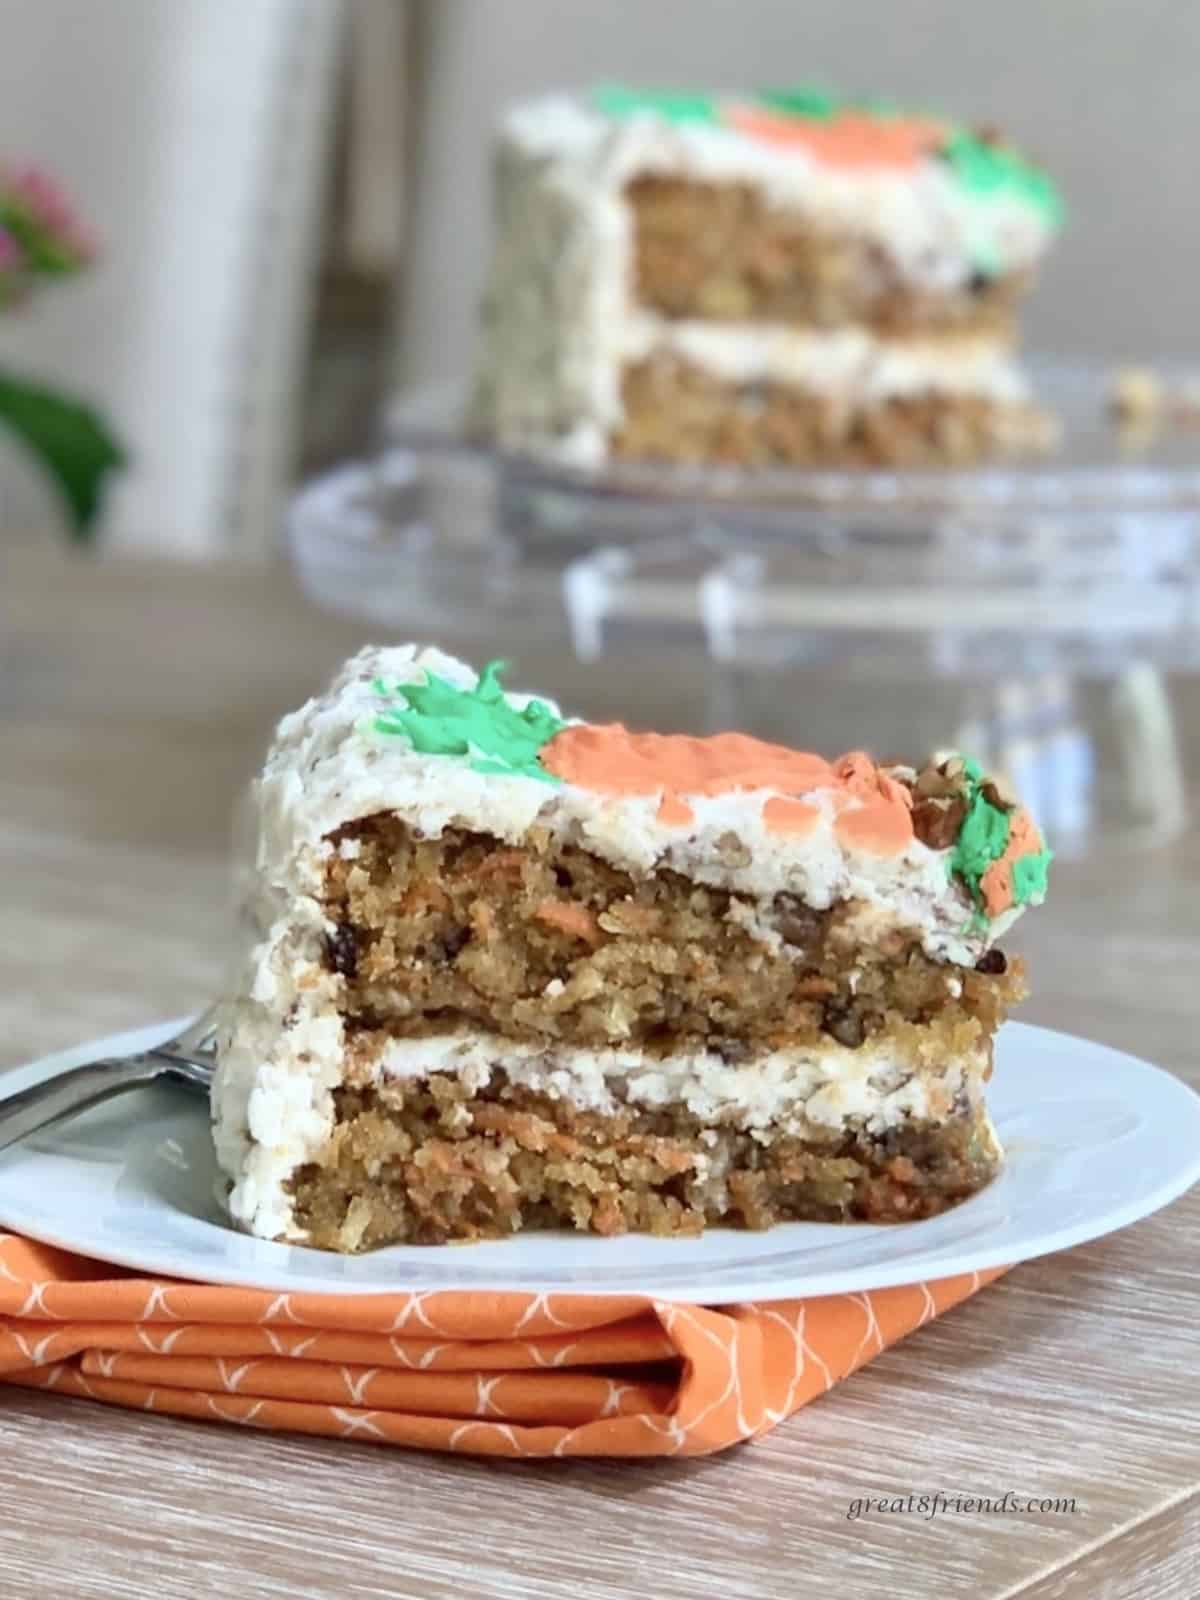 A piece of carrot cake on a white plate that is sitting on an orange cloth napkin with a carrot cake on a glass cake stand in the background.